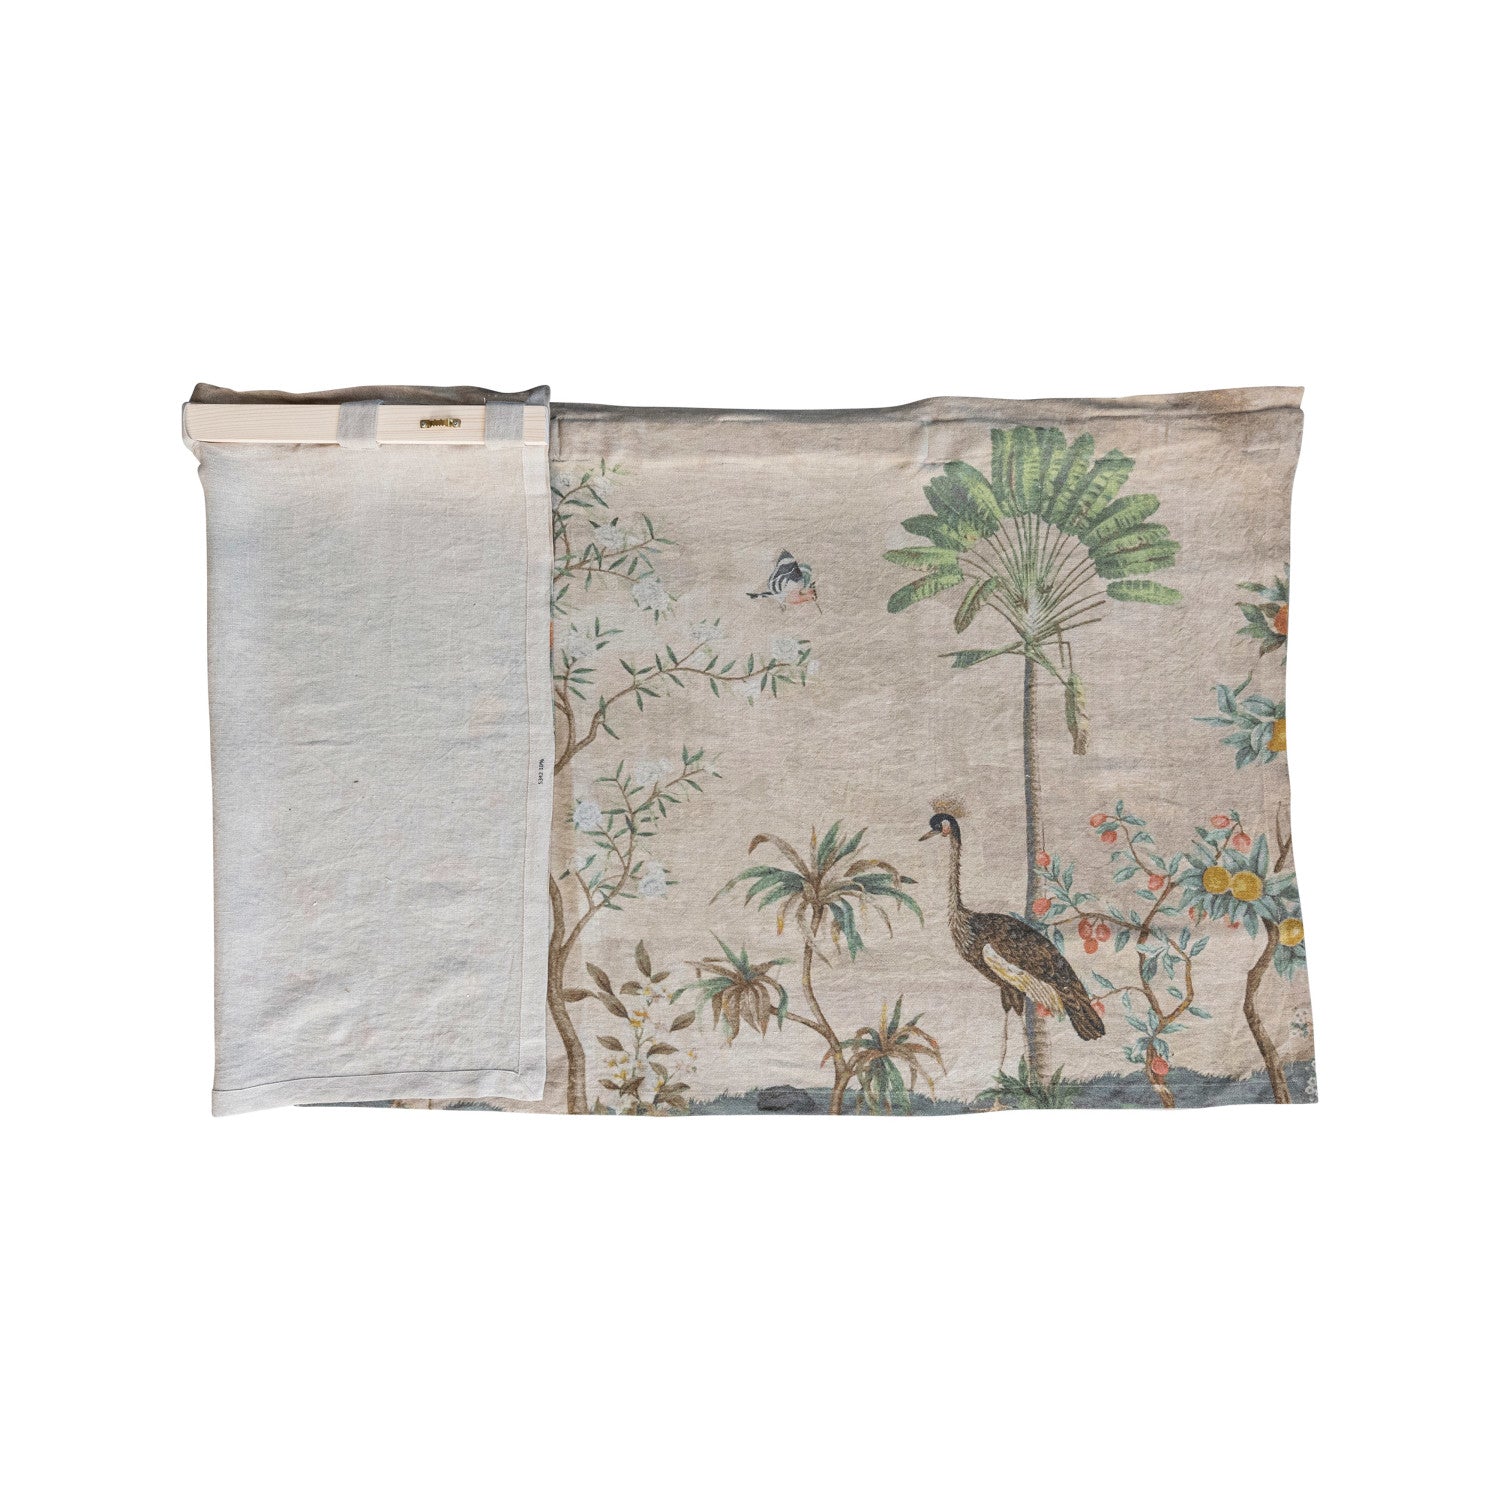 Landscape & Birds Linen Printed Wall Hanging includes a folding wood mounting rod. 